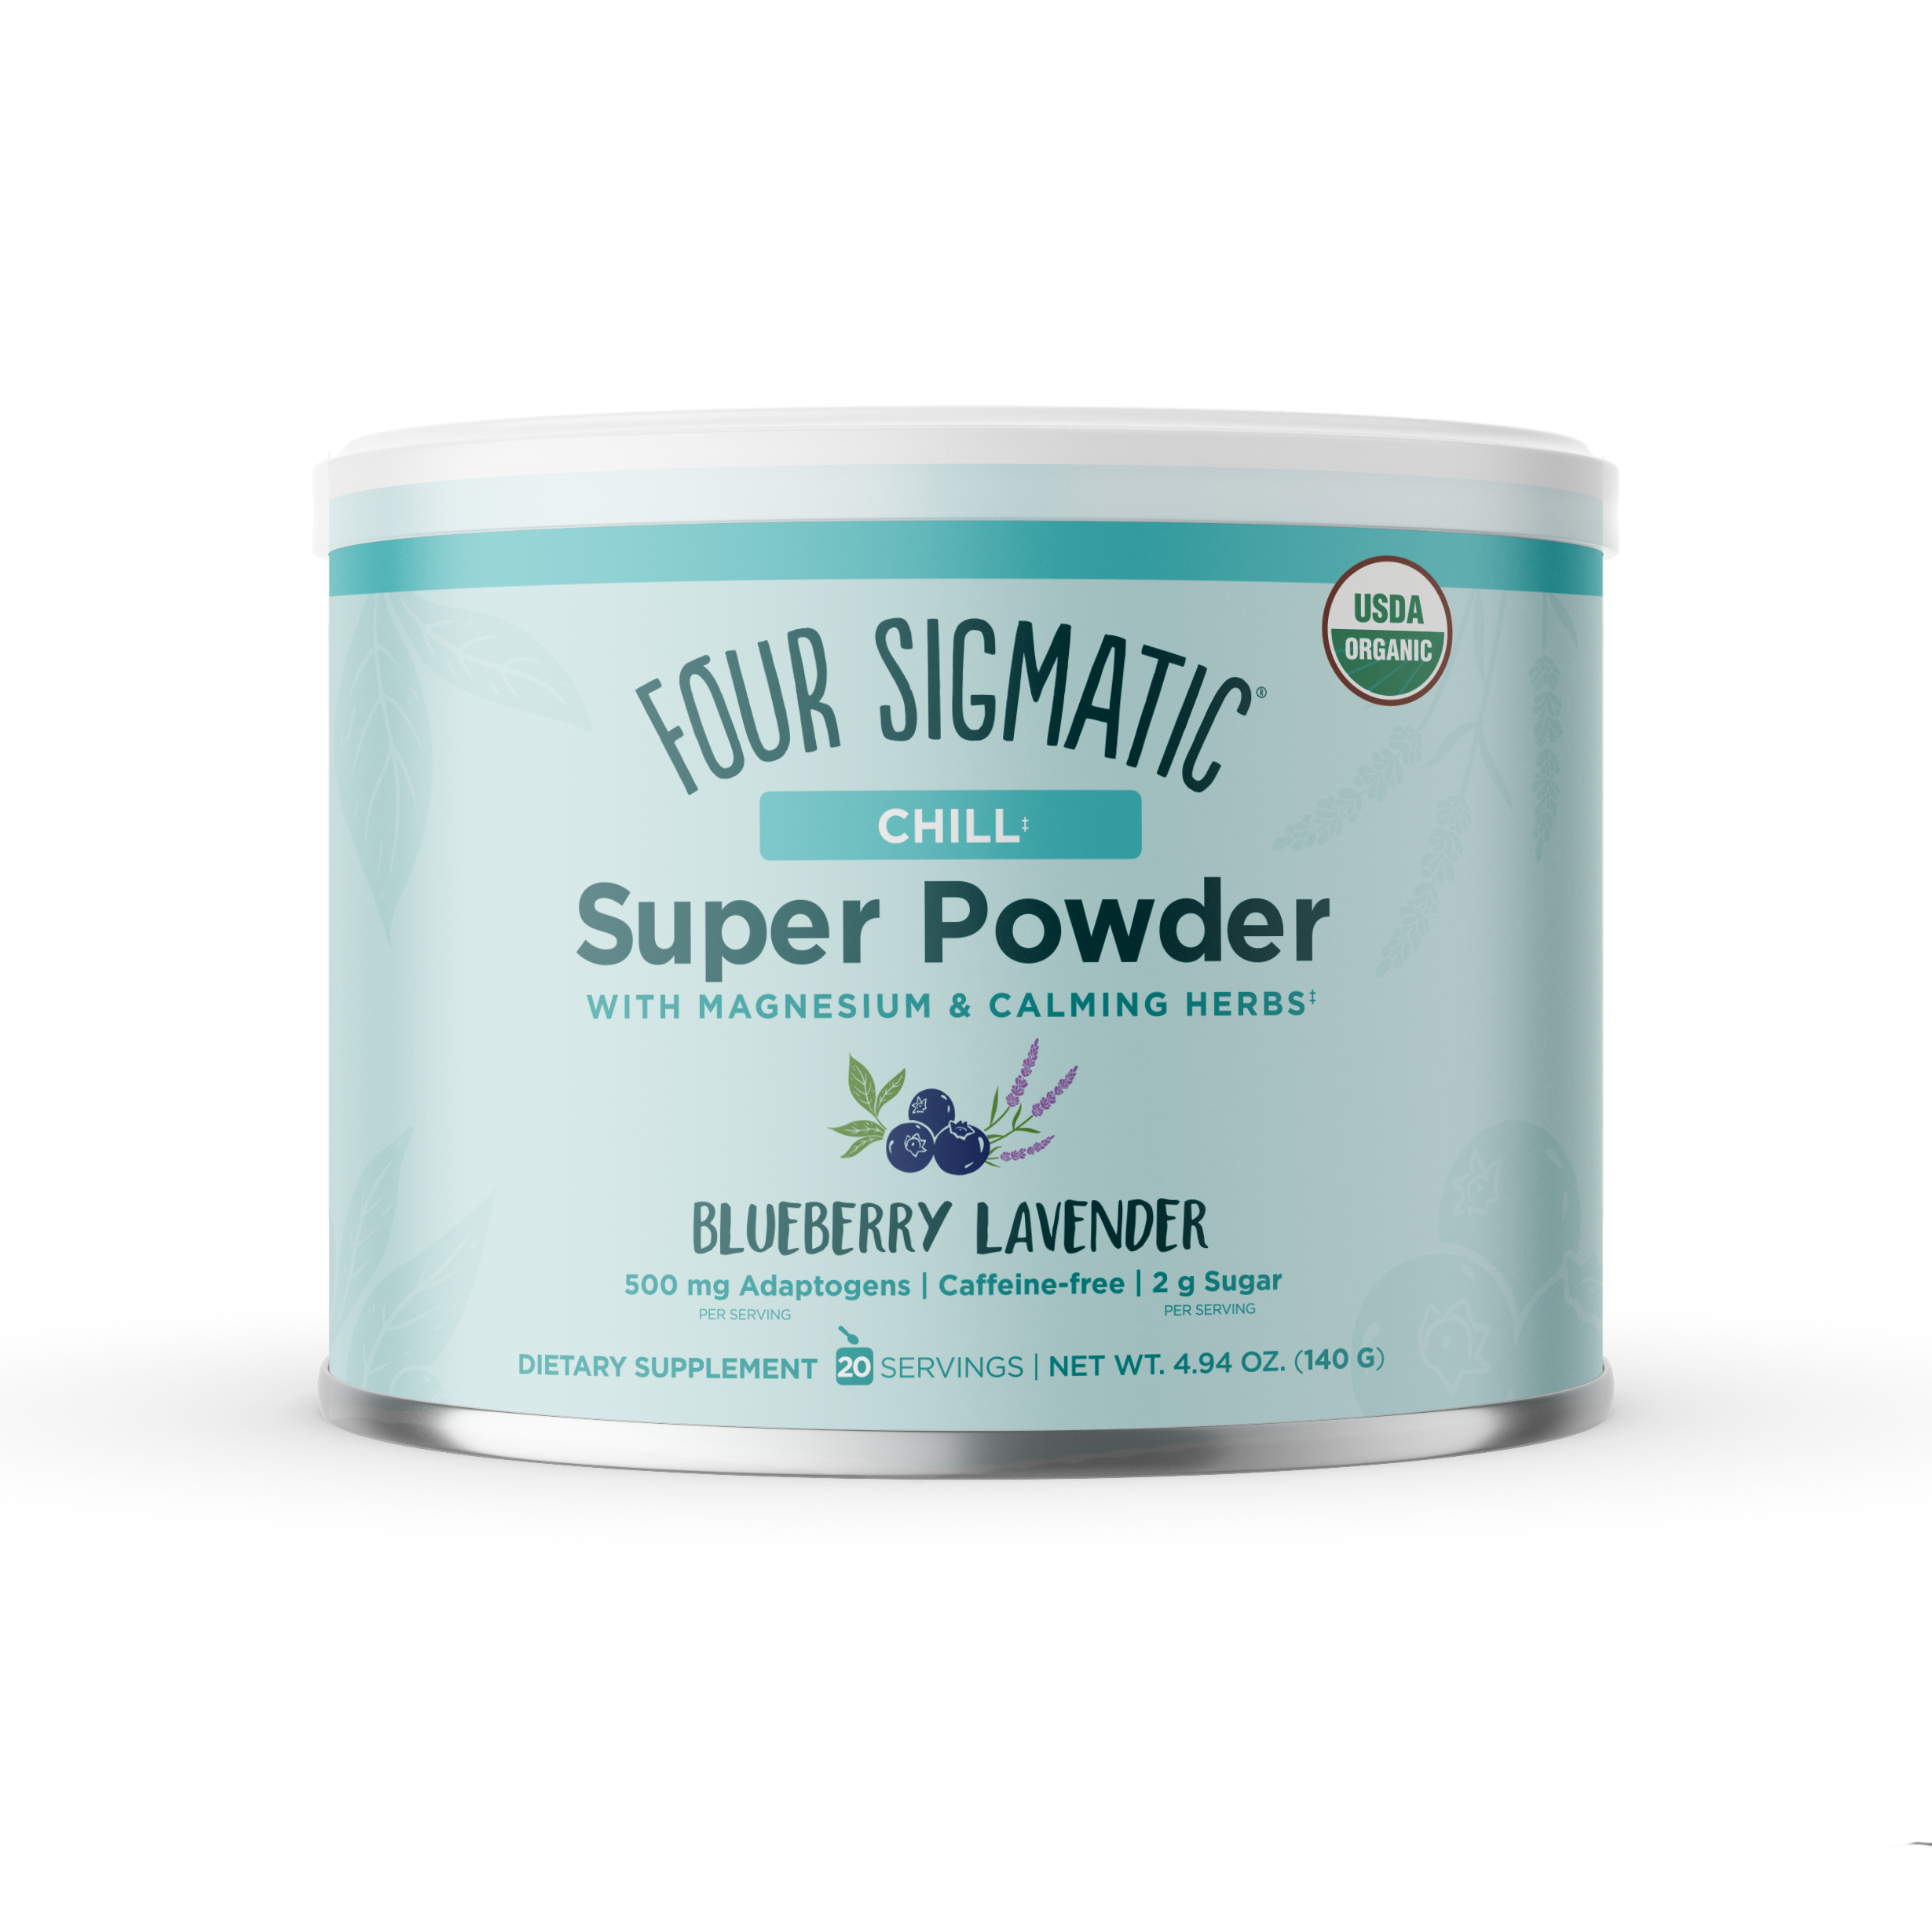 Chill Super Powder with Magnesium & Calming Herbs